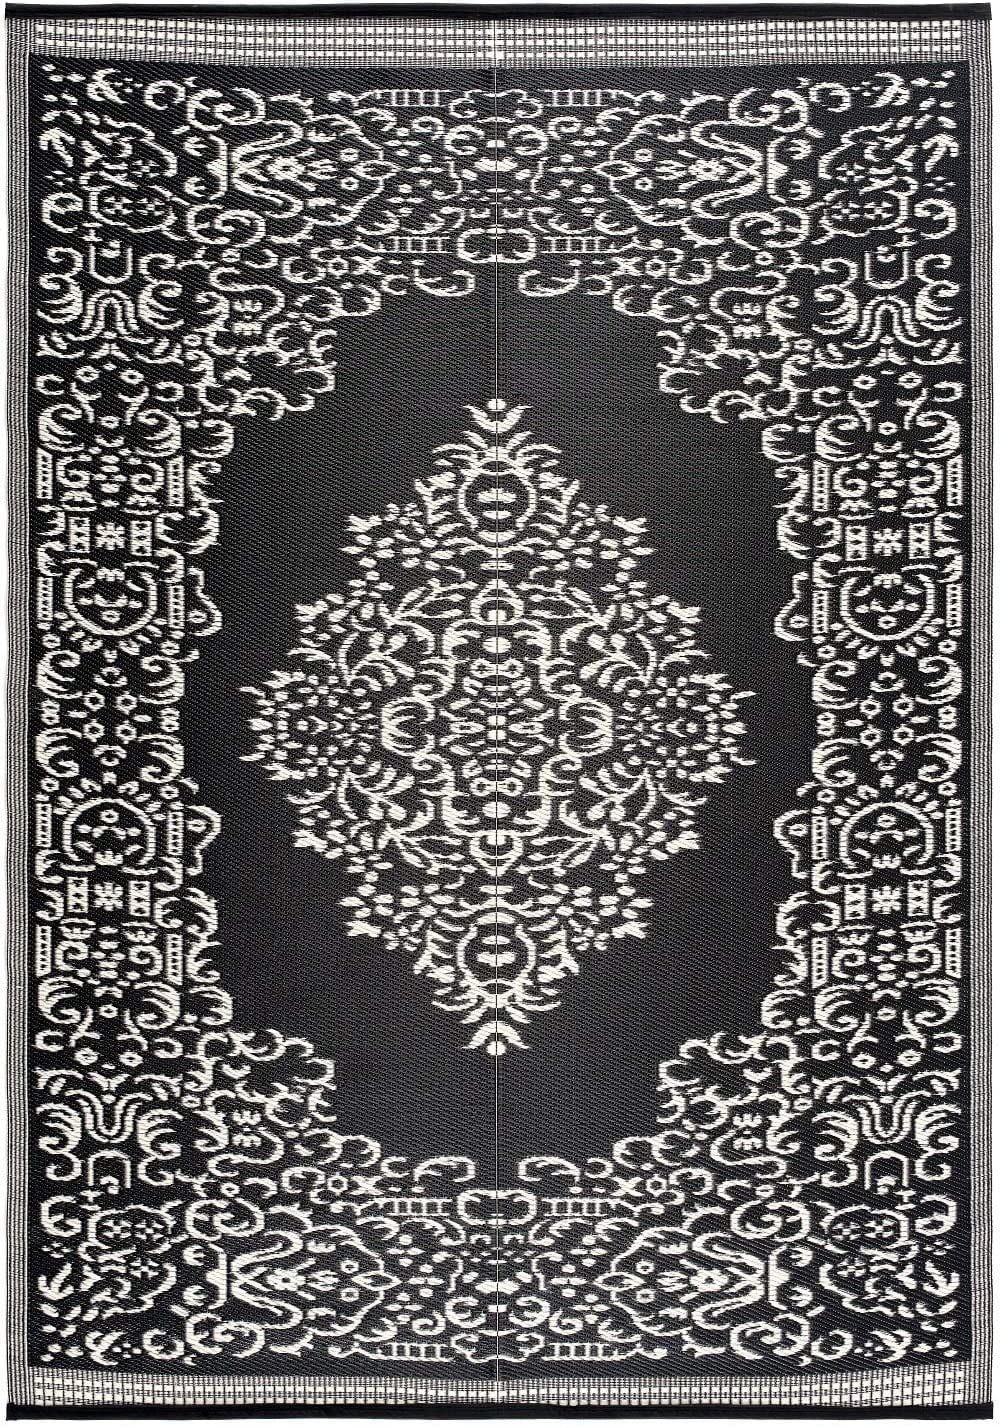 Beverly Rug 4' x 6' Black and White Medallion Outdoor Rug | Walmart (US)